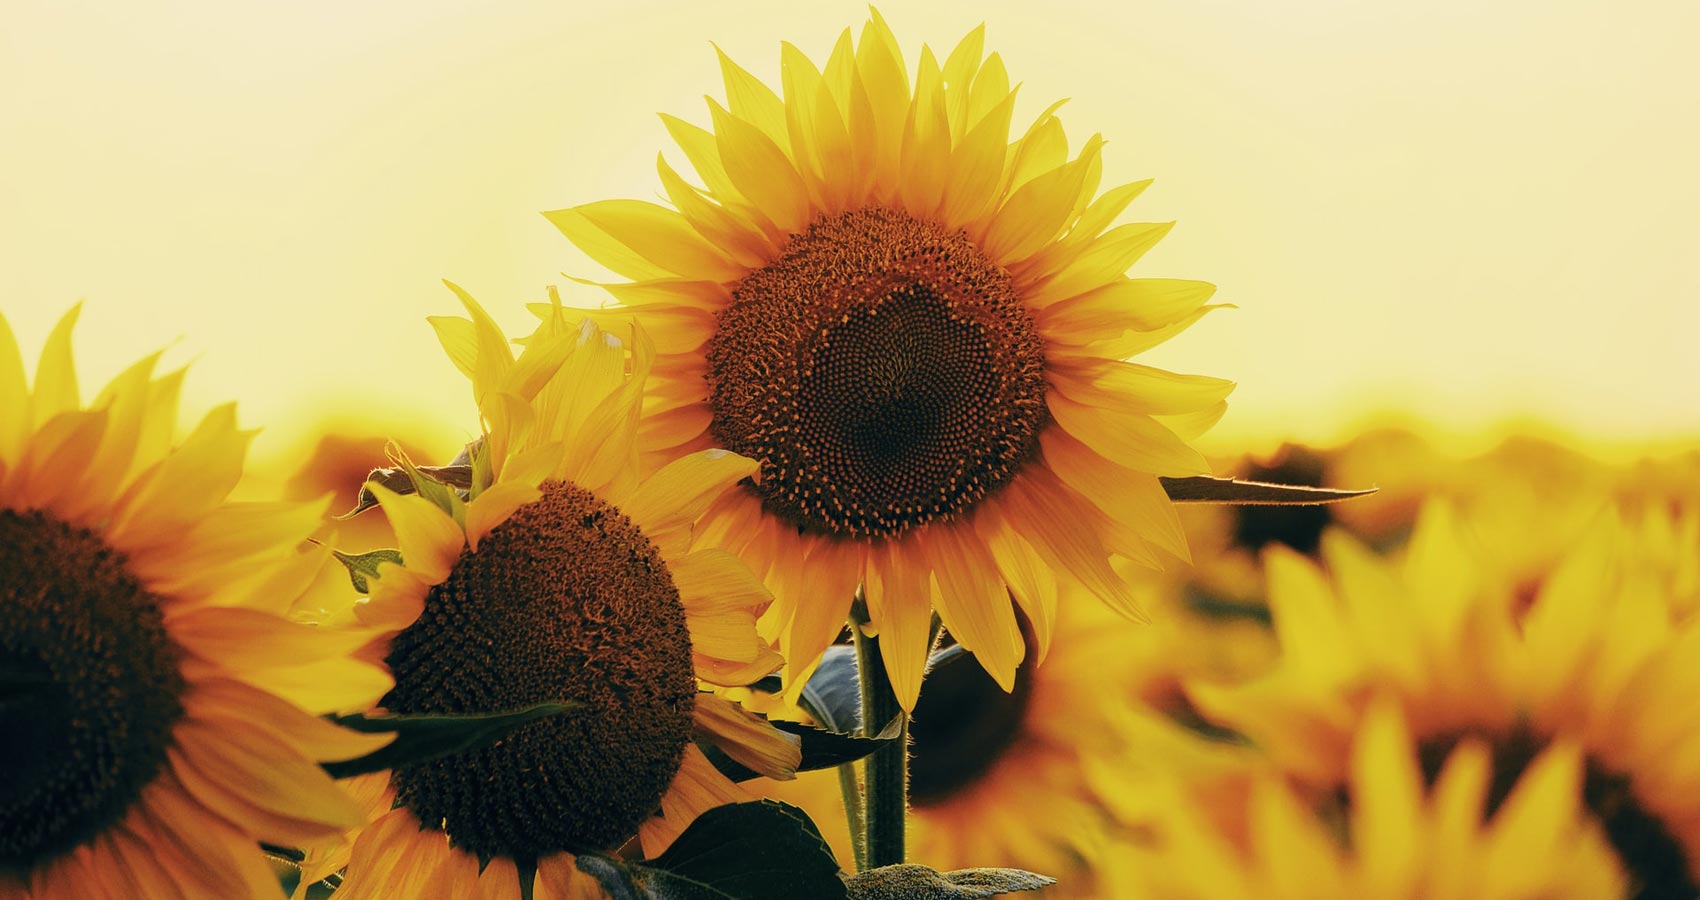 May Sunflowers Always Grow, poem by Linda M. Crate at Spillwords.com